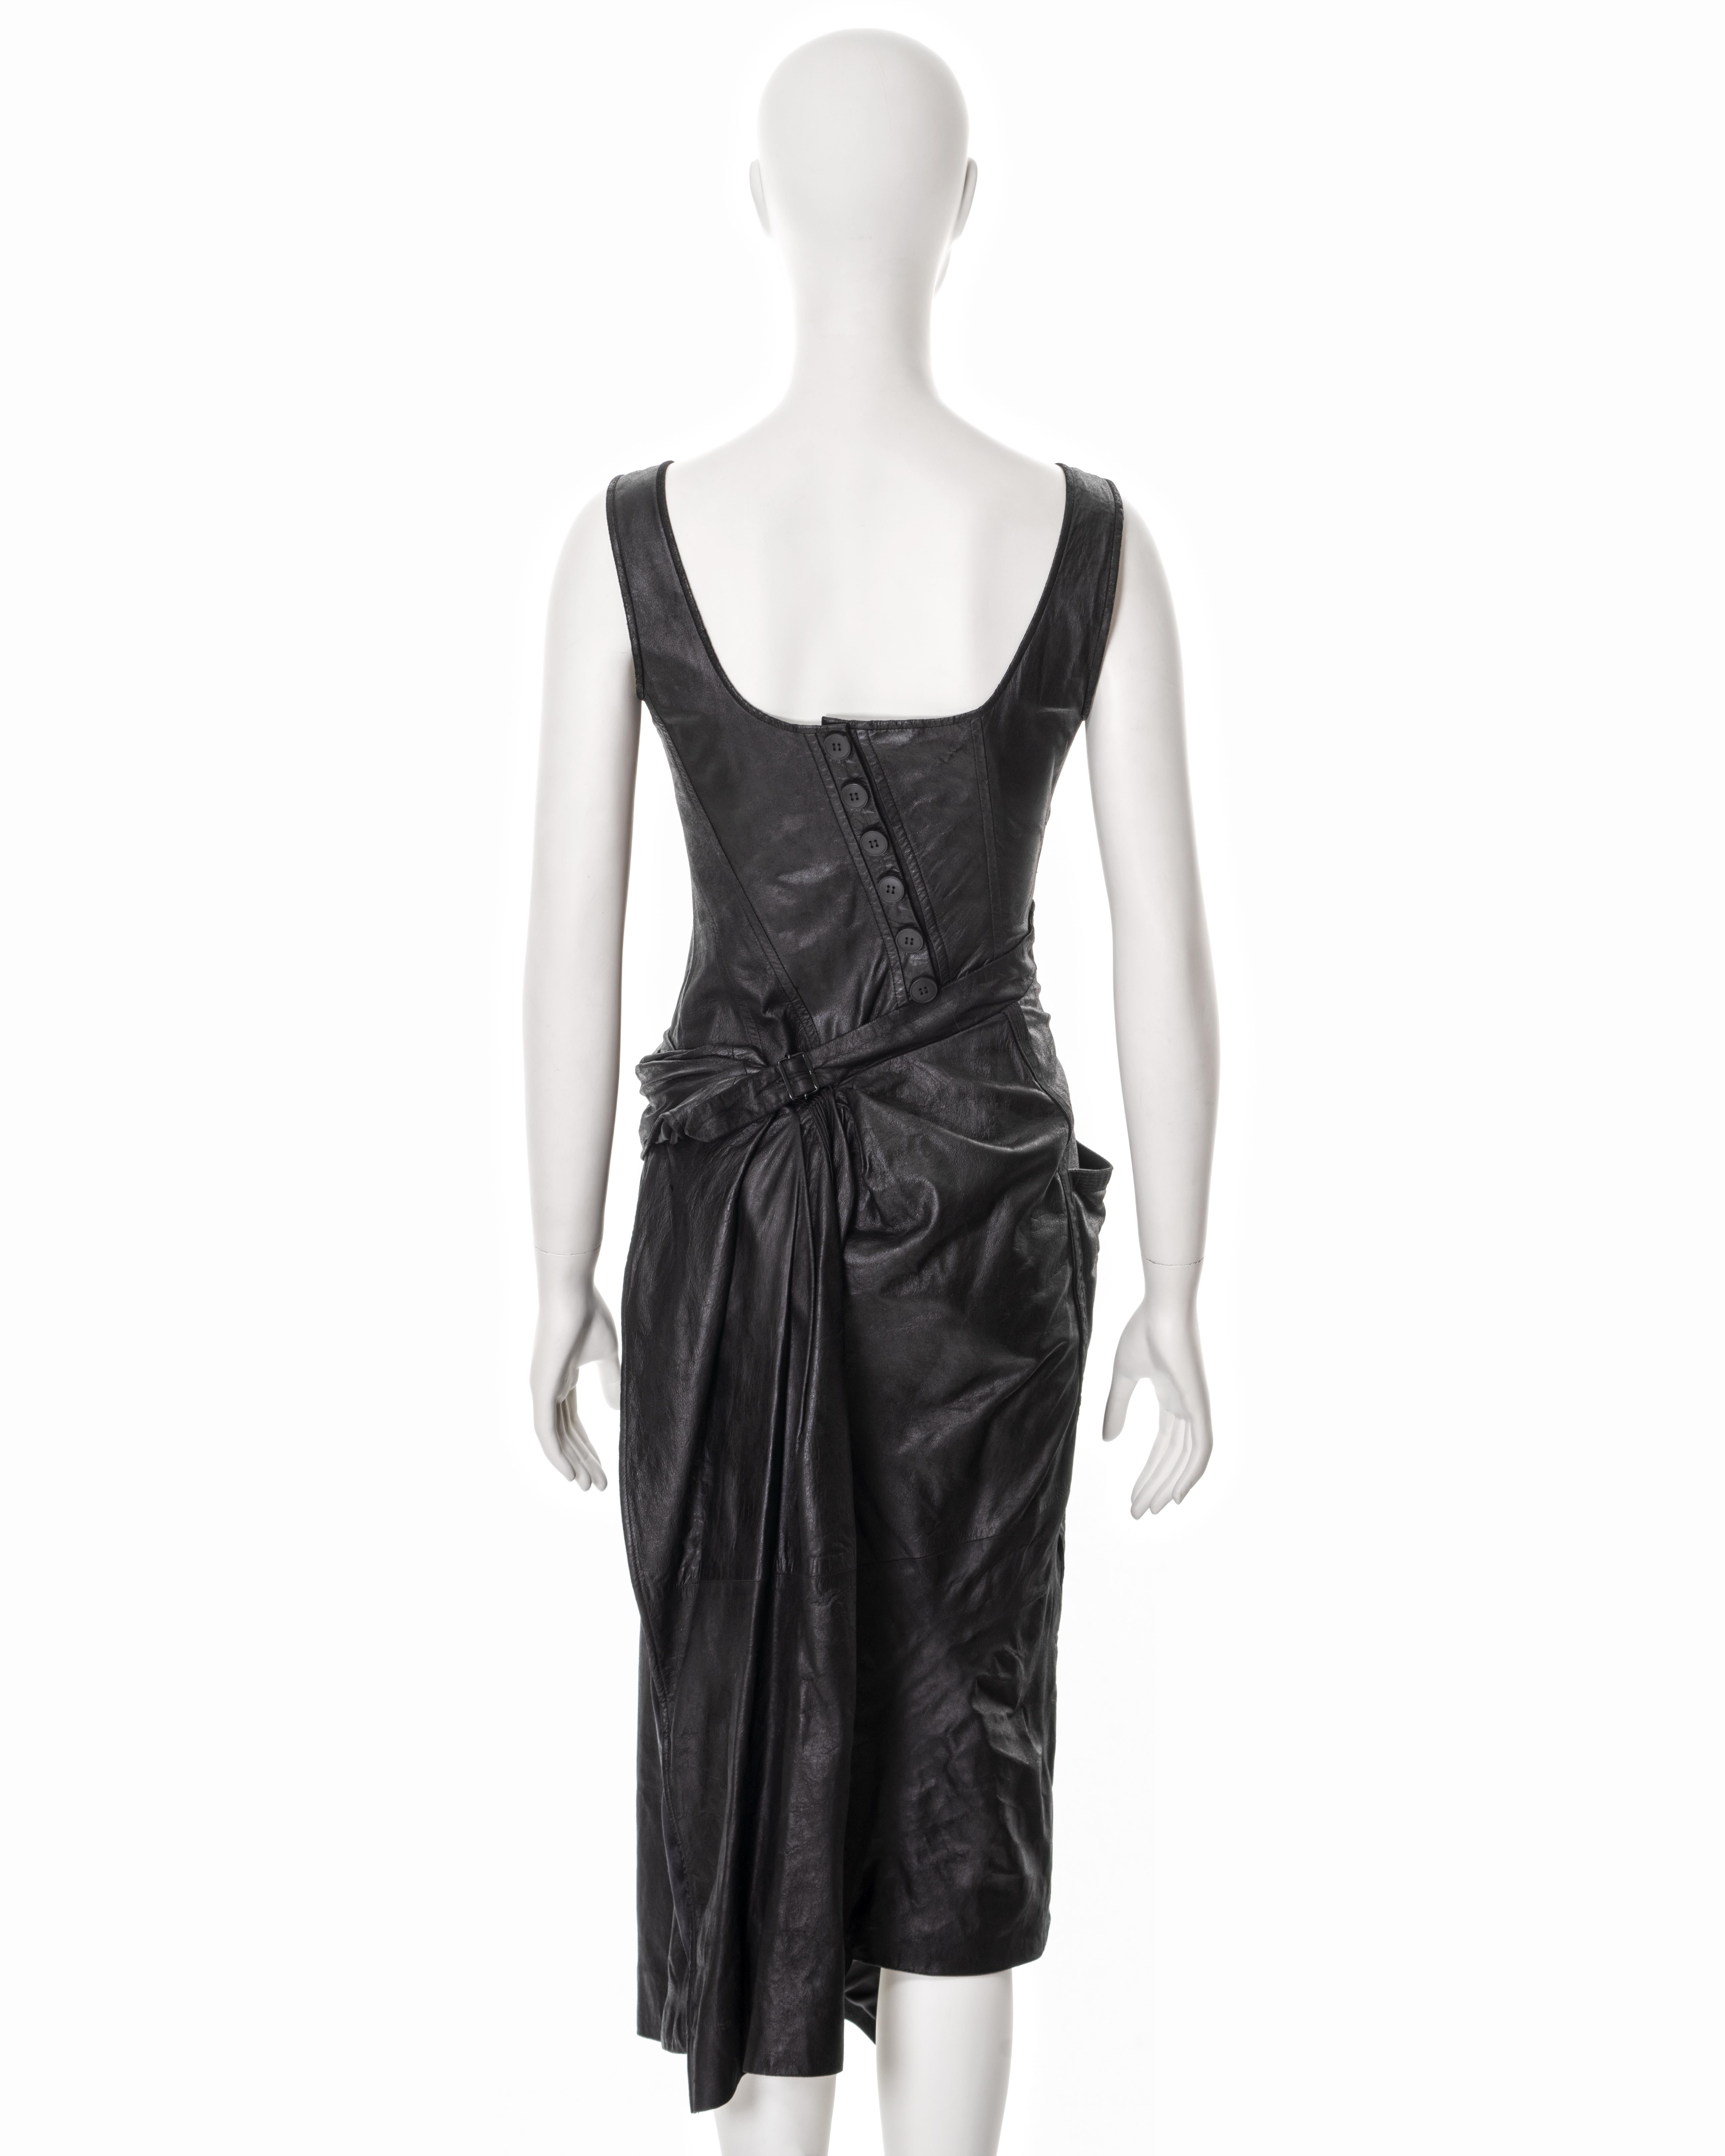 Christian Dior by John Galliano black leather deconstructed dress, ss 2000 3